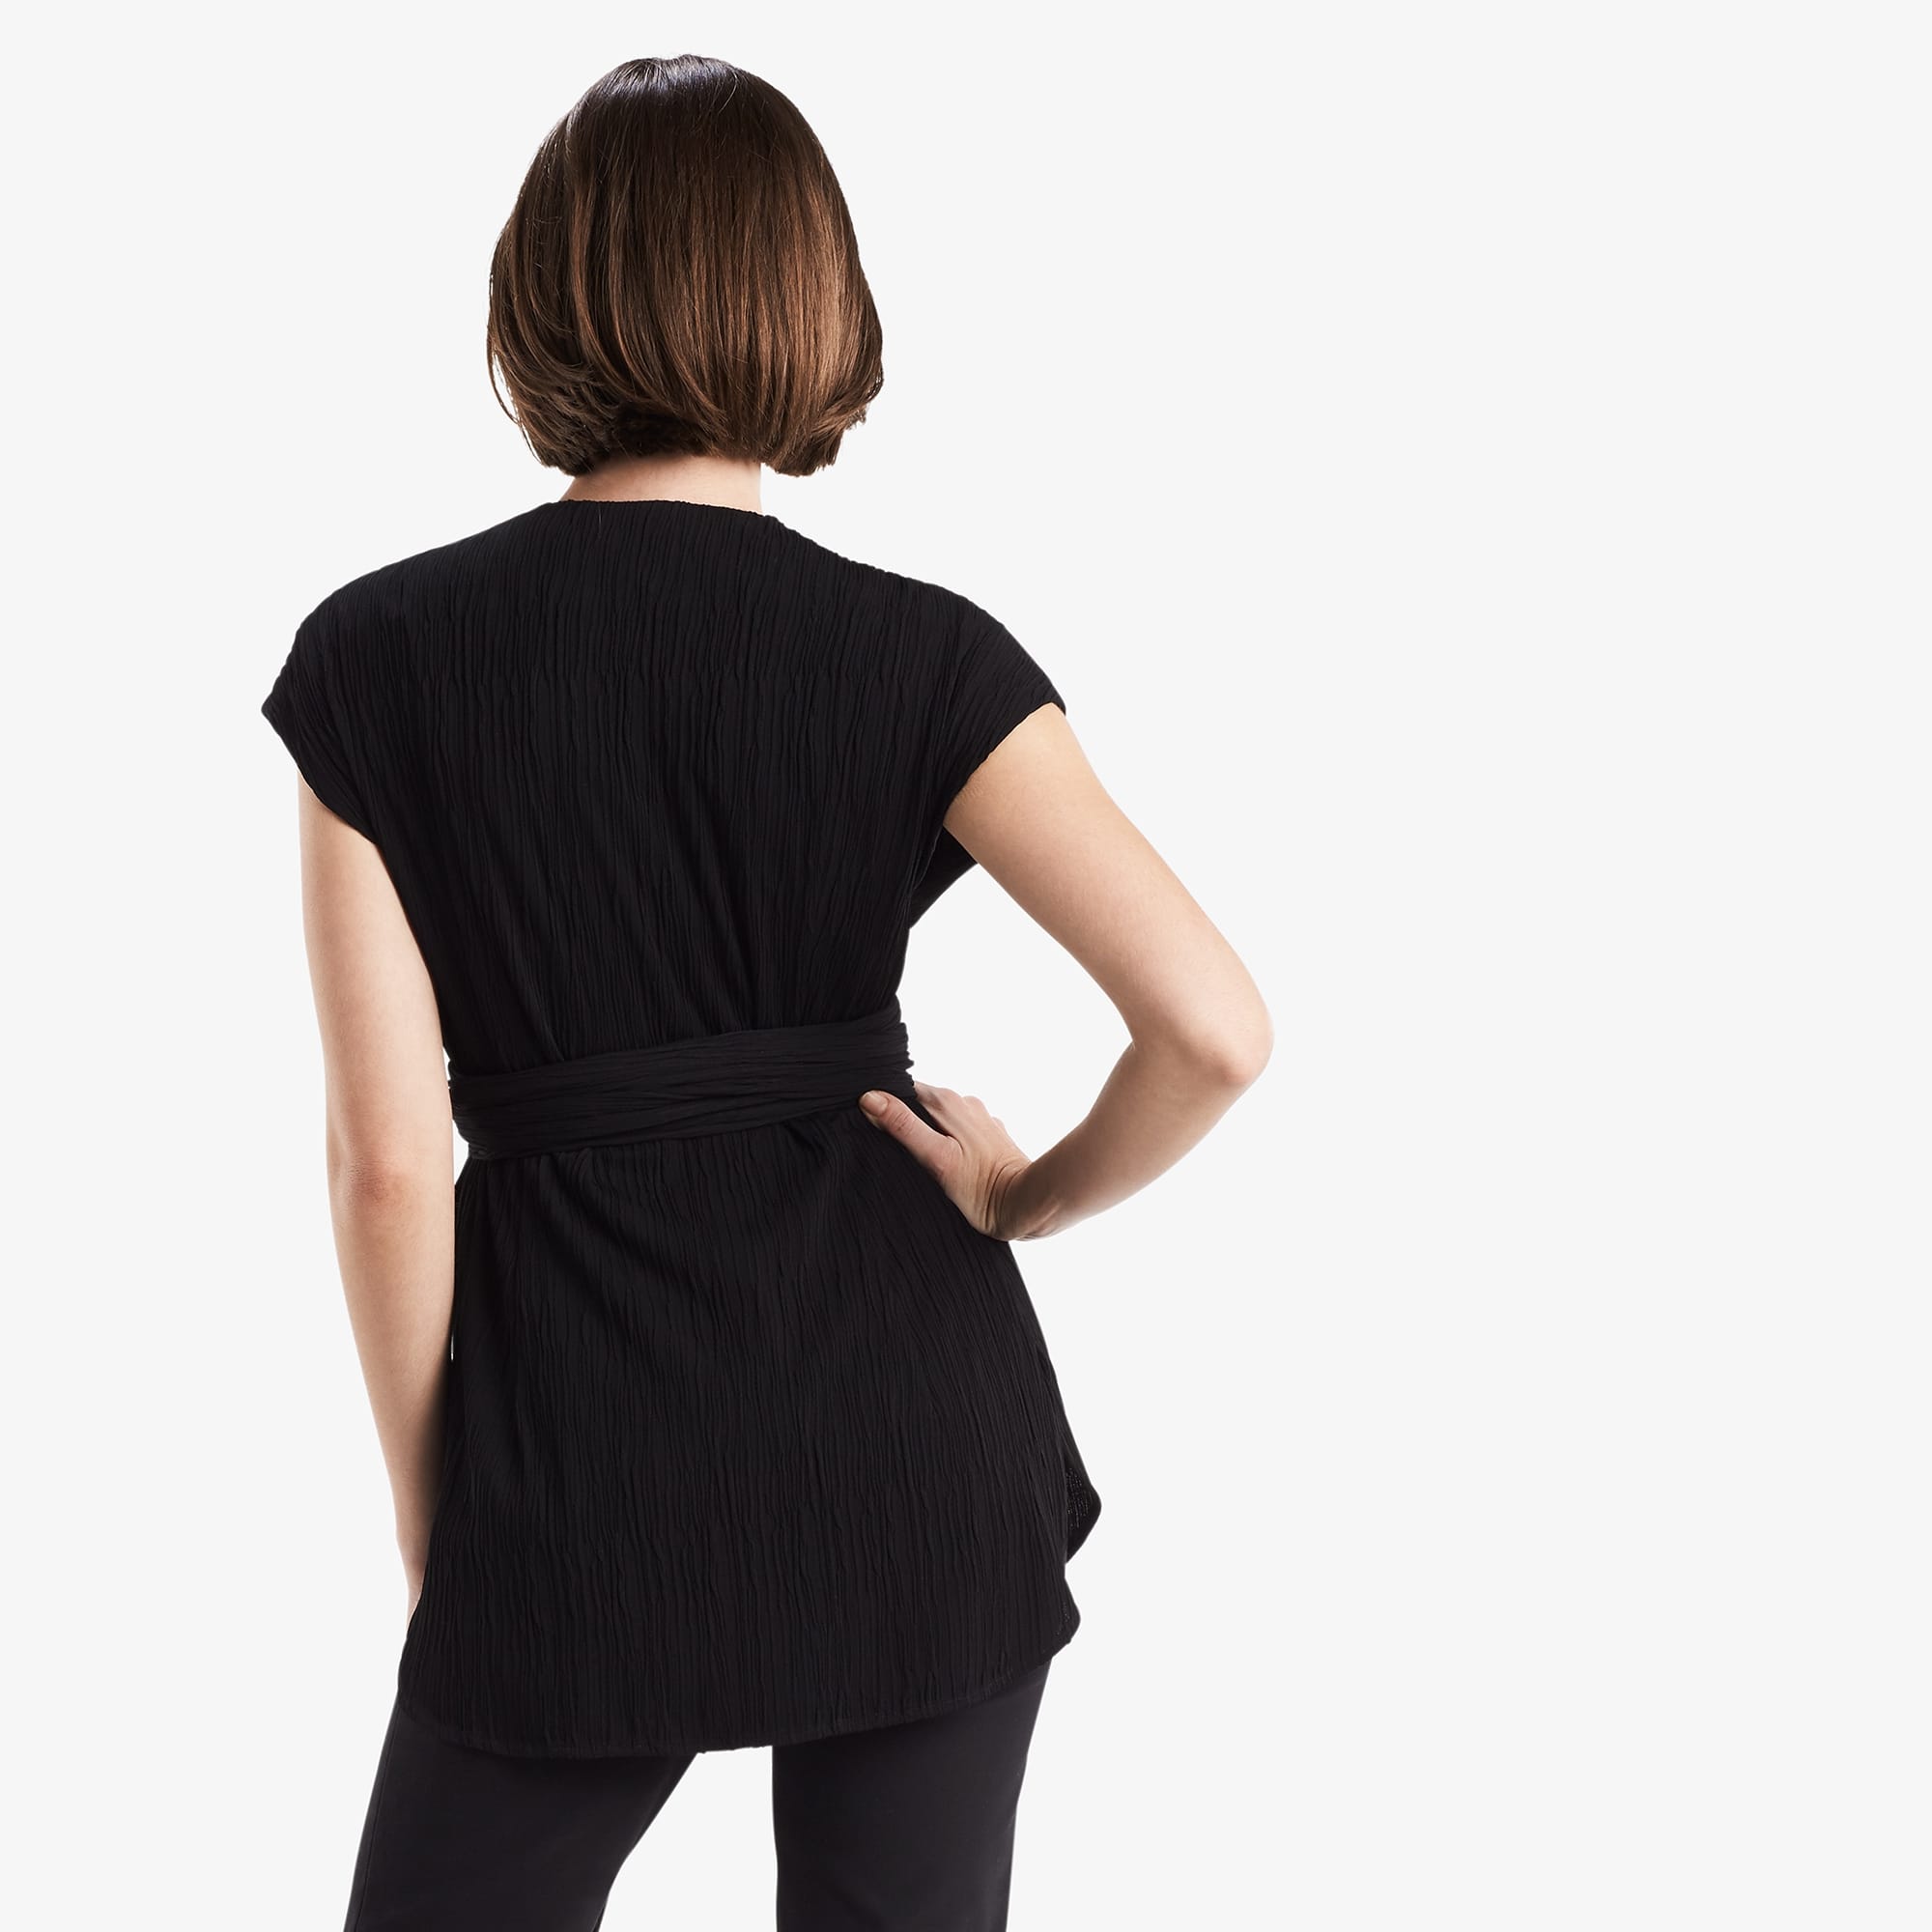 Back image of a woman standing wearing the Valerie Top in black